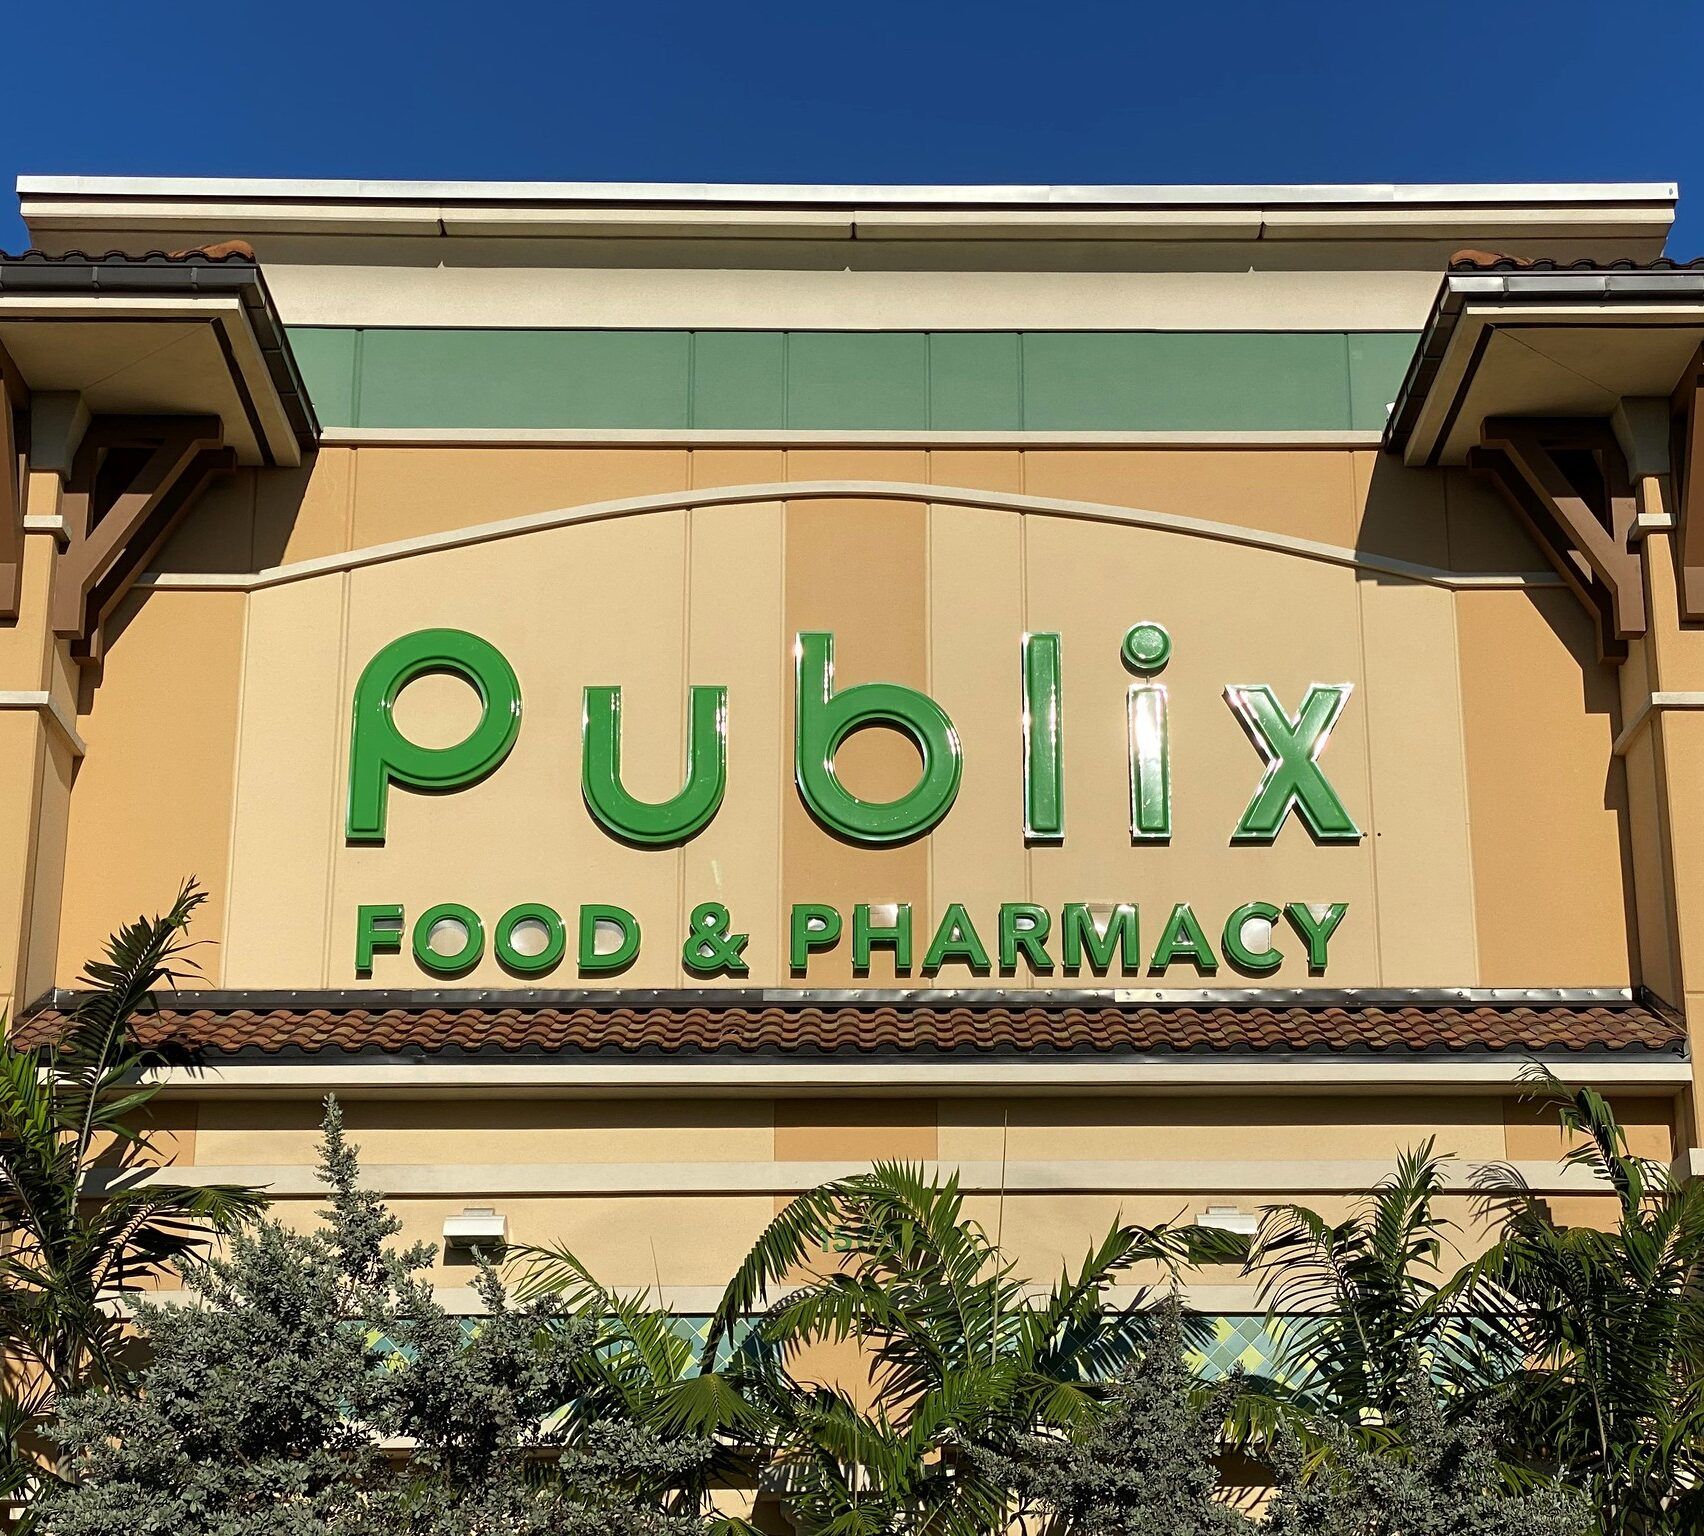 Exterior of Publix grocery store